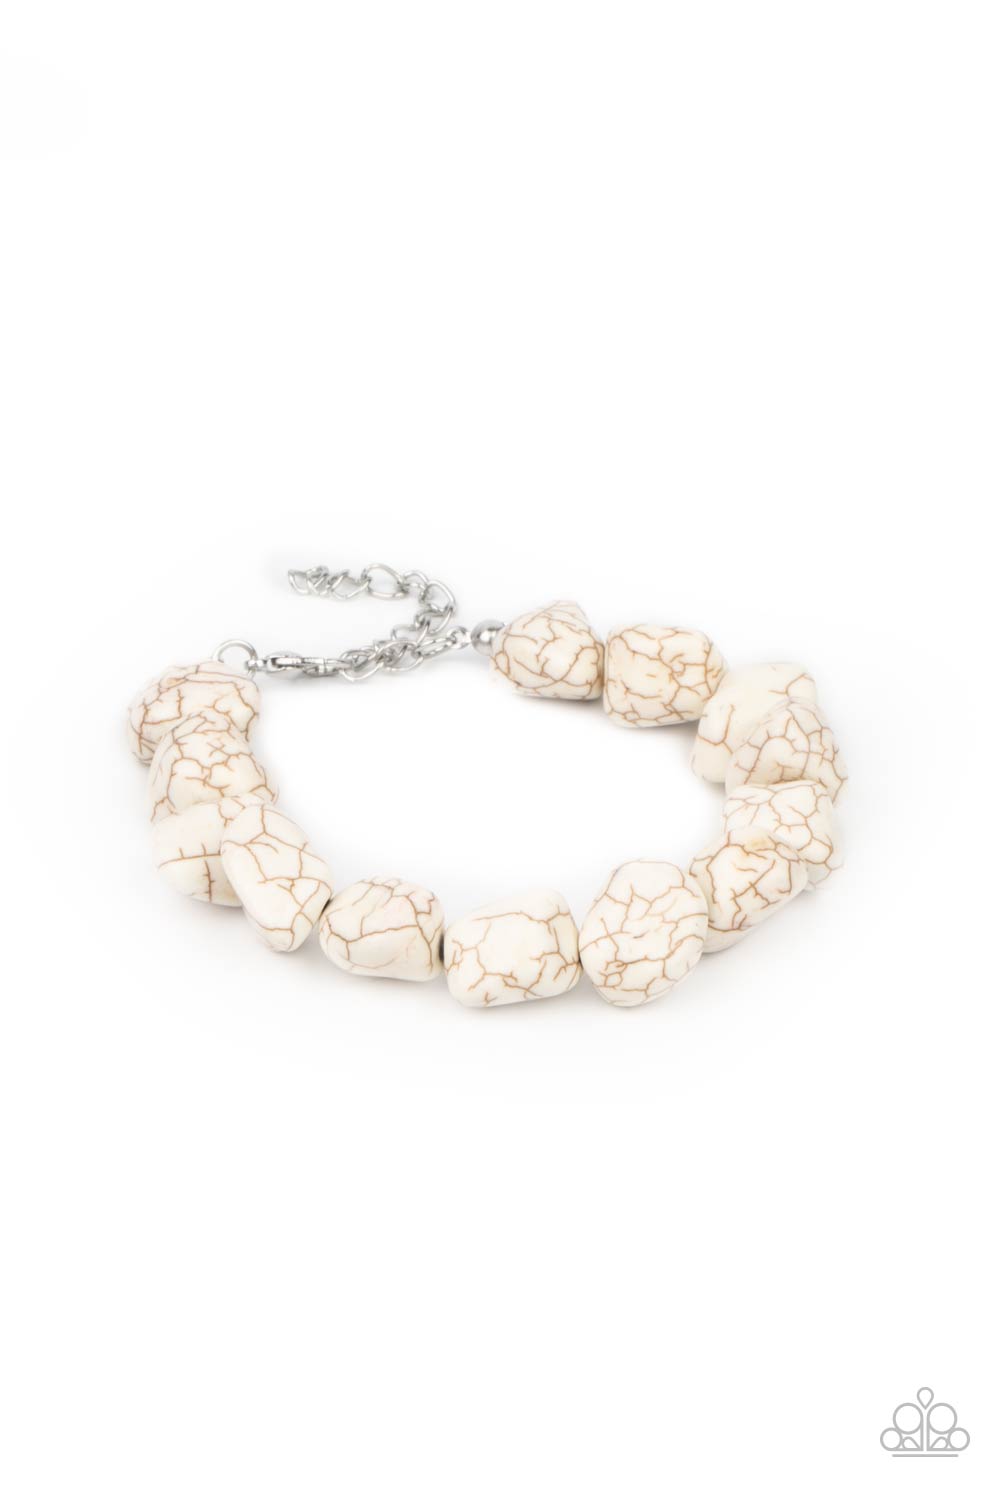 Prehistoric Paradise - White Crackle Stone - Fashion Bracelet - Paparazzi Accessories - A collection of imperfect white stones are threaded along an invisible wire around the wrist, creating an earthy centerpiece. Bracelet has an adjustable clasp closure. 